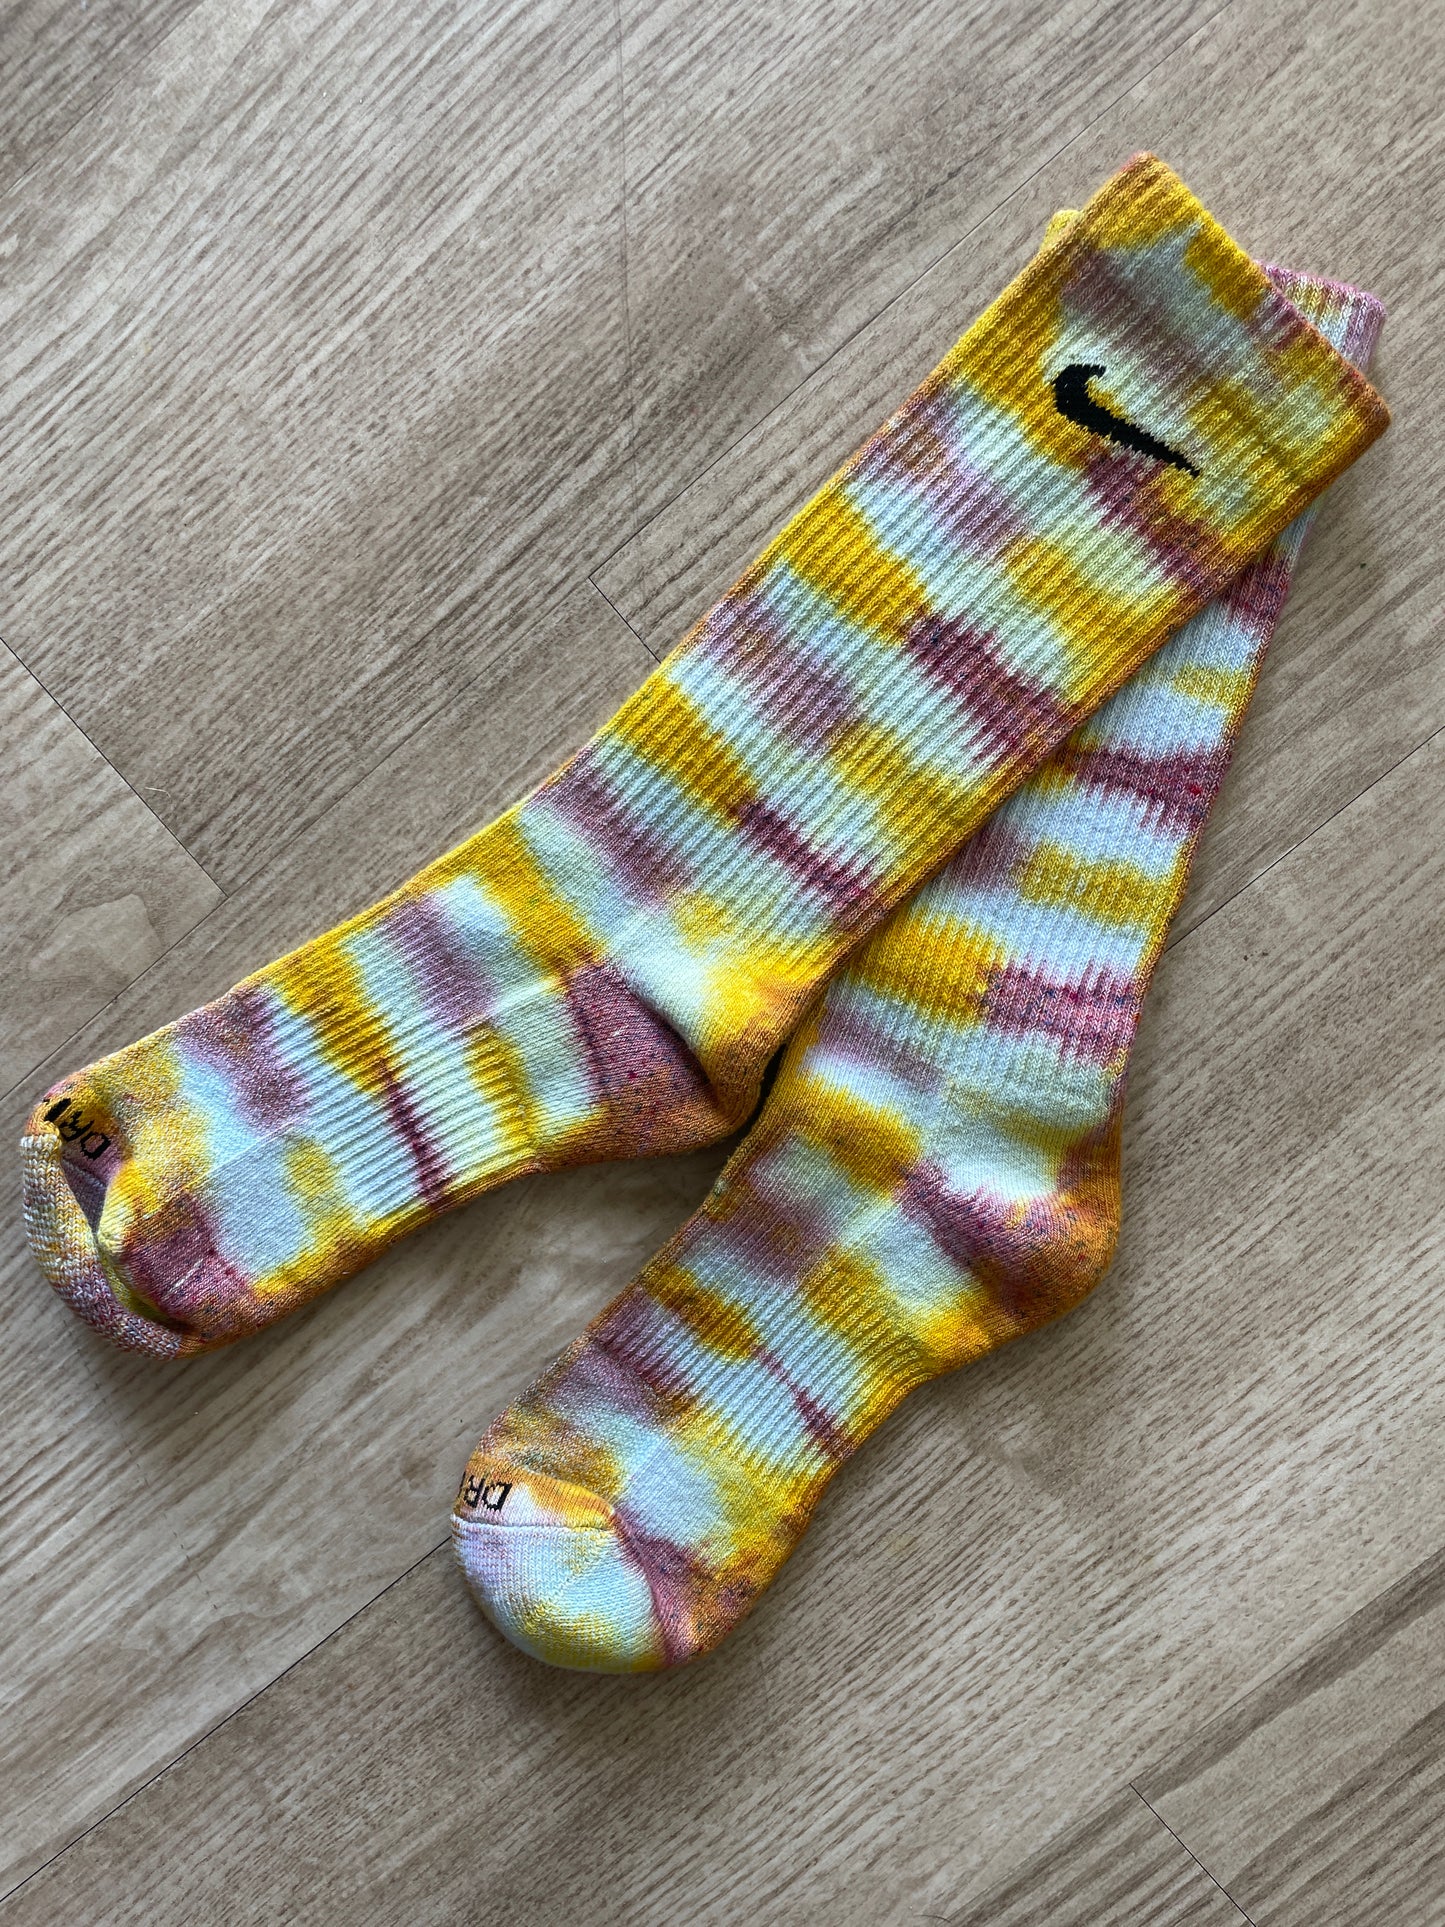 NIKE Socks Hand Tie Dyed Yellow and Pink Nike Dri-FIT Everyday Plus Crew Training Socks - Size Large (Men's 8-12/Women's 10-13)